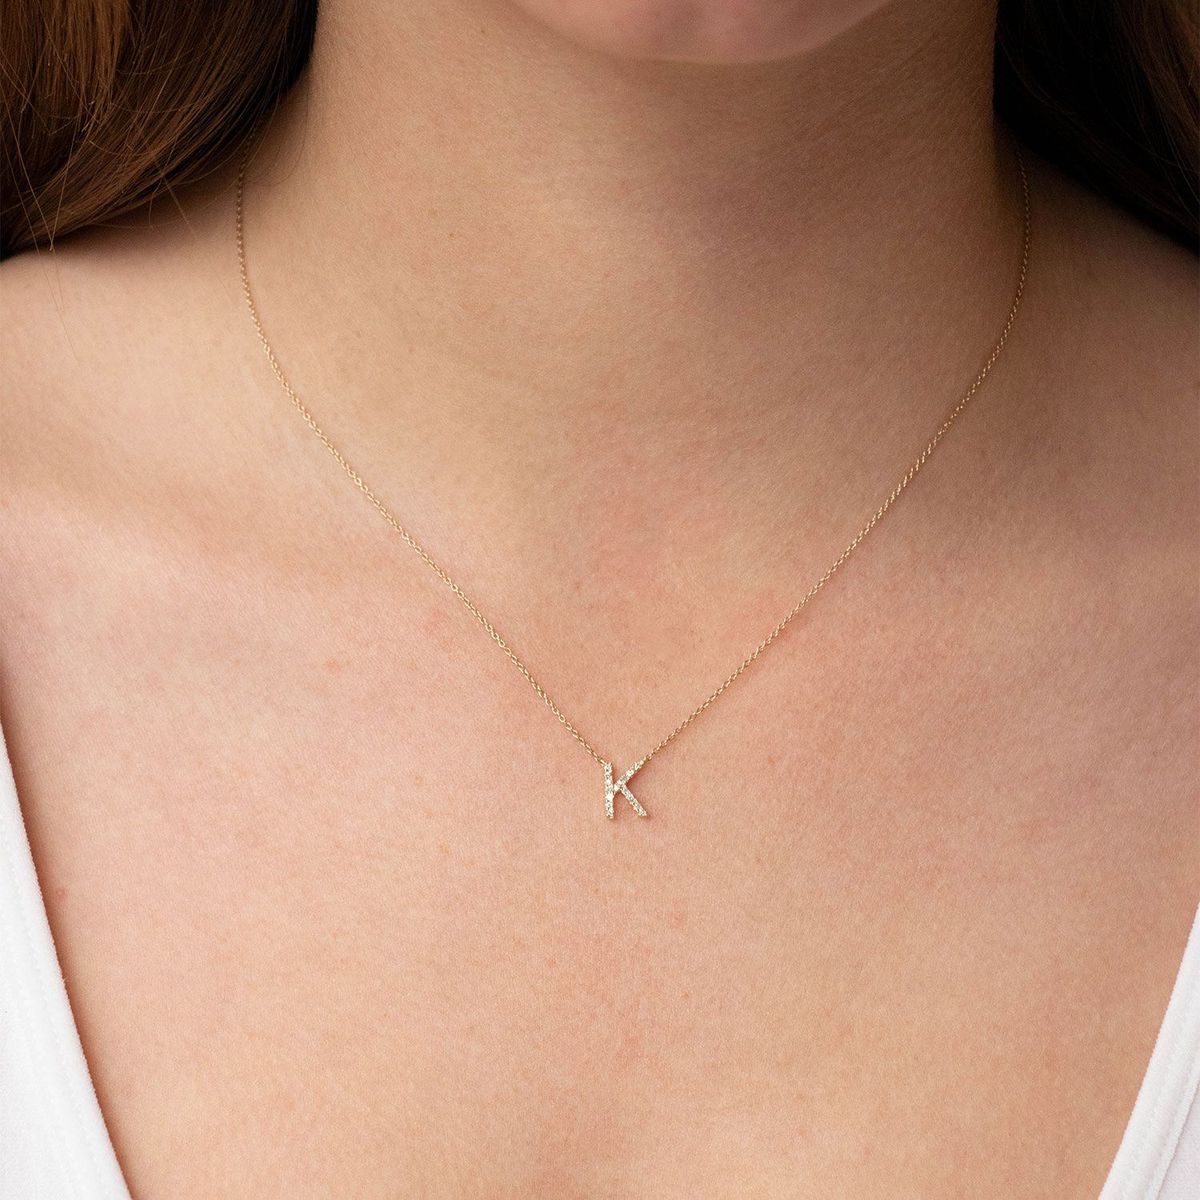 9ct Yellow Gold Diamond Initial 'K' Necklace